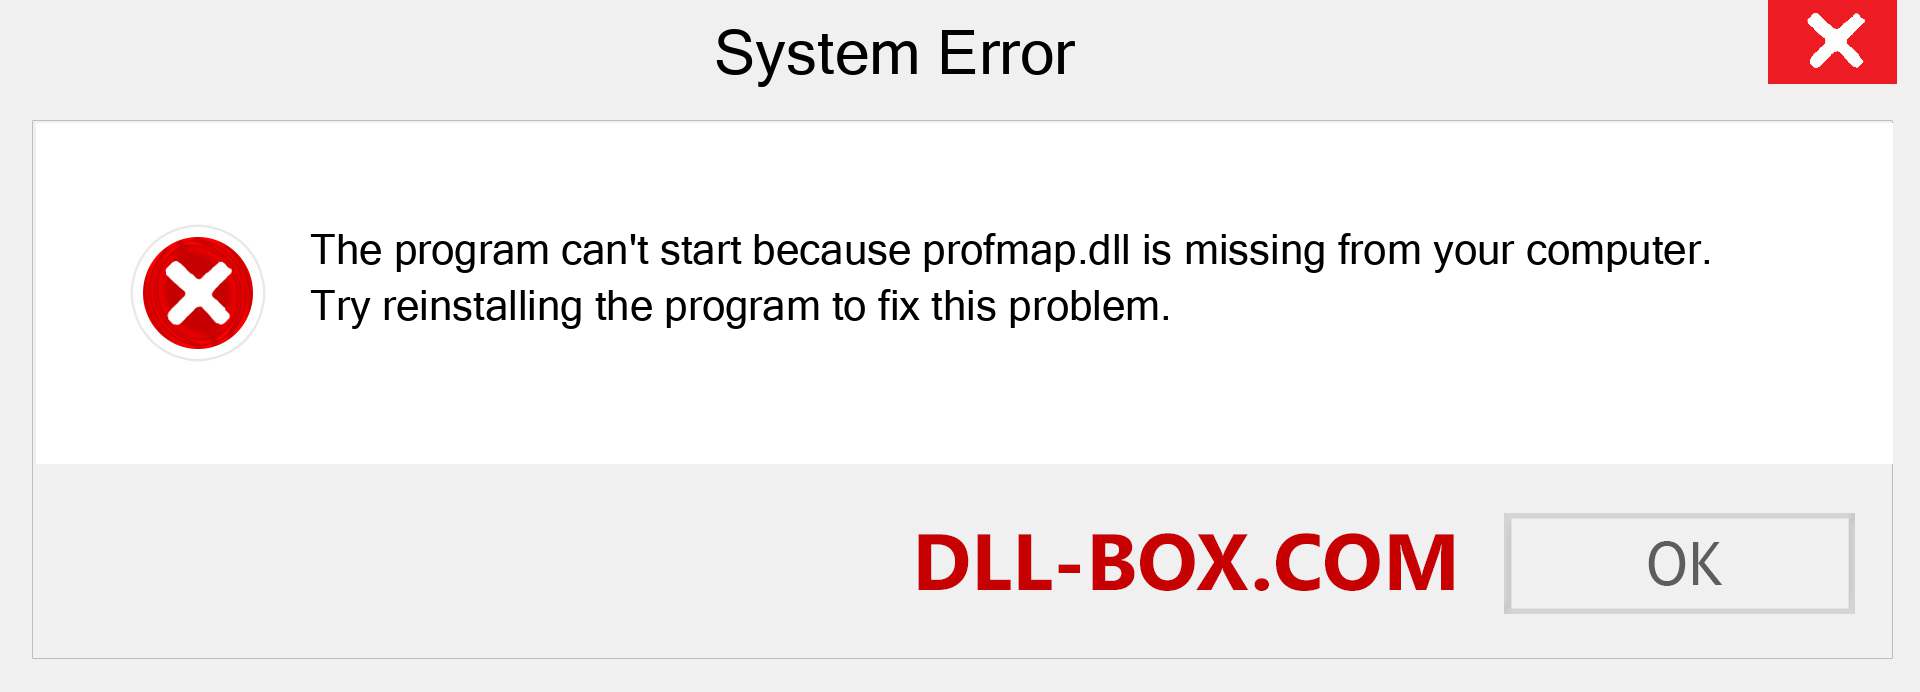  profmap.dll file is missing?. Download for Windows 7, 8, 10 - Fix  profmap dll Missing Error on Windows, photos, images